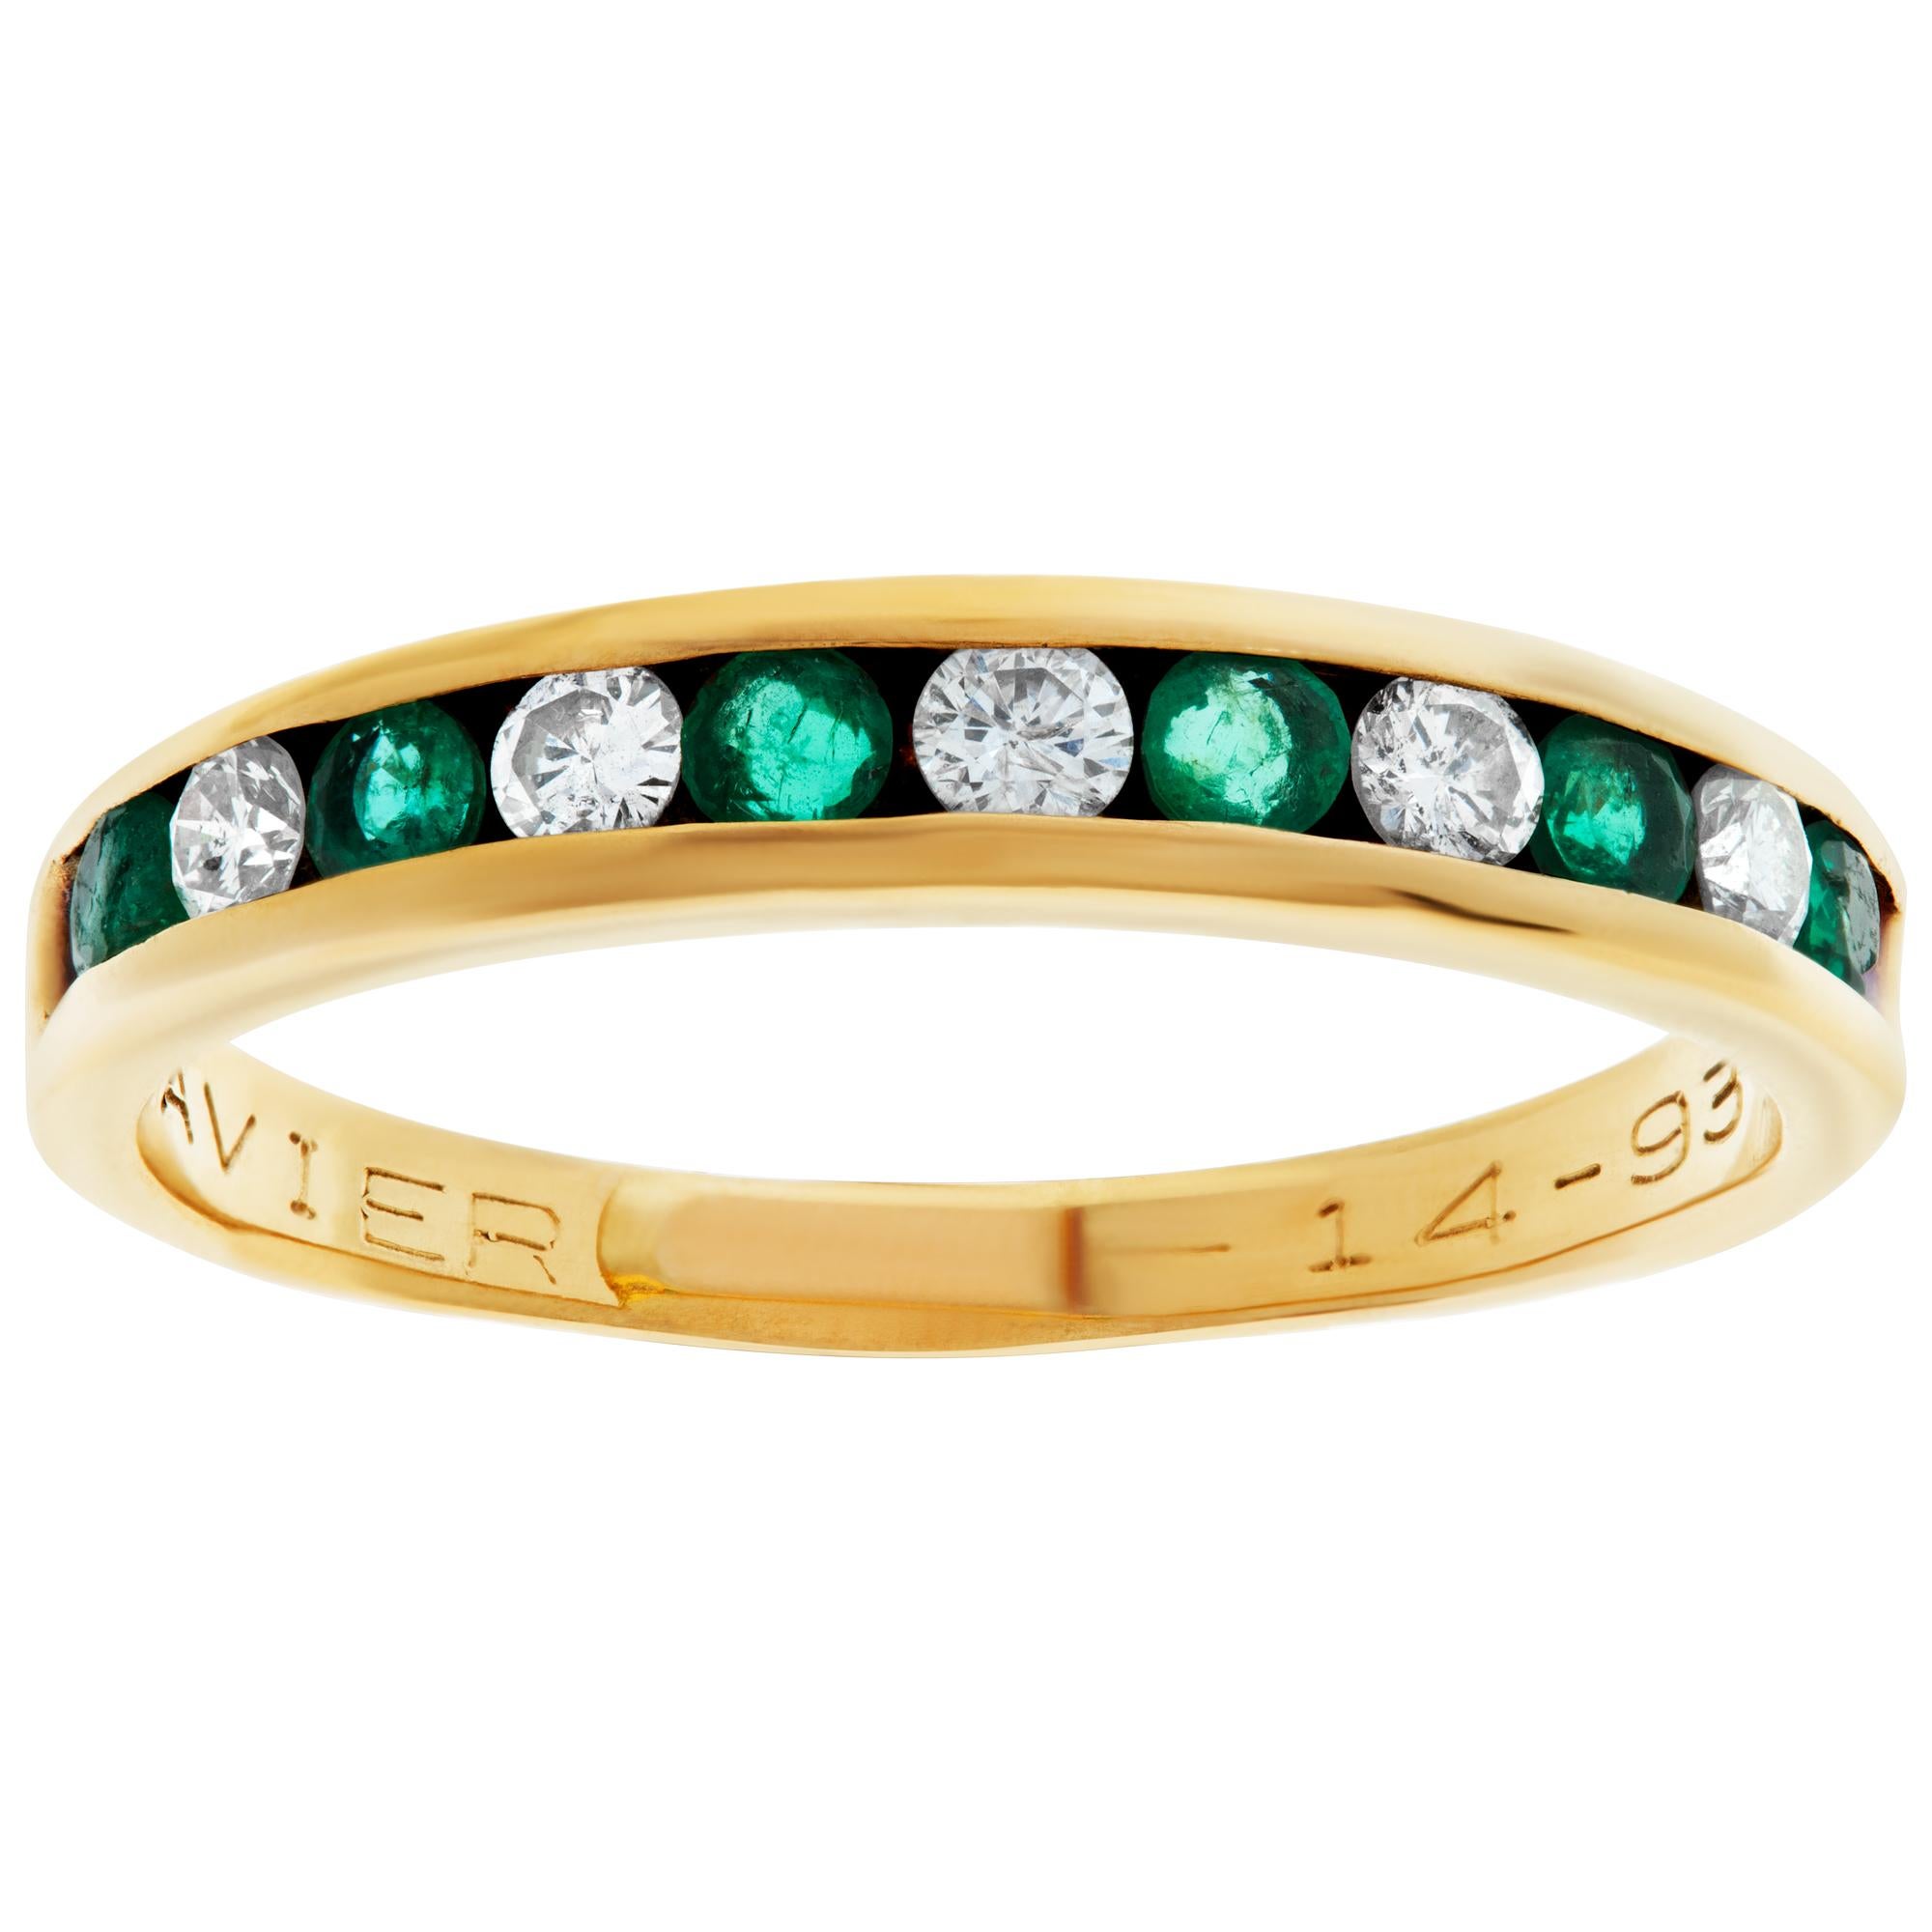 Emerald and diamond semi eternity band in 14k yellow gold. Round brilliant cut diamonds total approx. weight: 0.20 carat (all white & eye clean). Oval brilliant cut emerald total approx. weight: 0.24 carat.Width 3.5mm. Size 7.5.This Diamond/Emerald